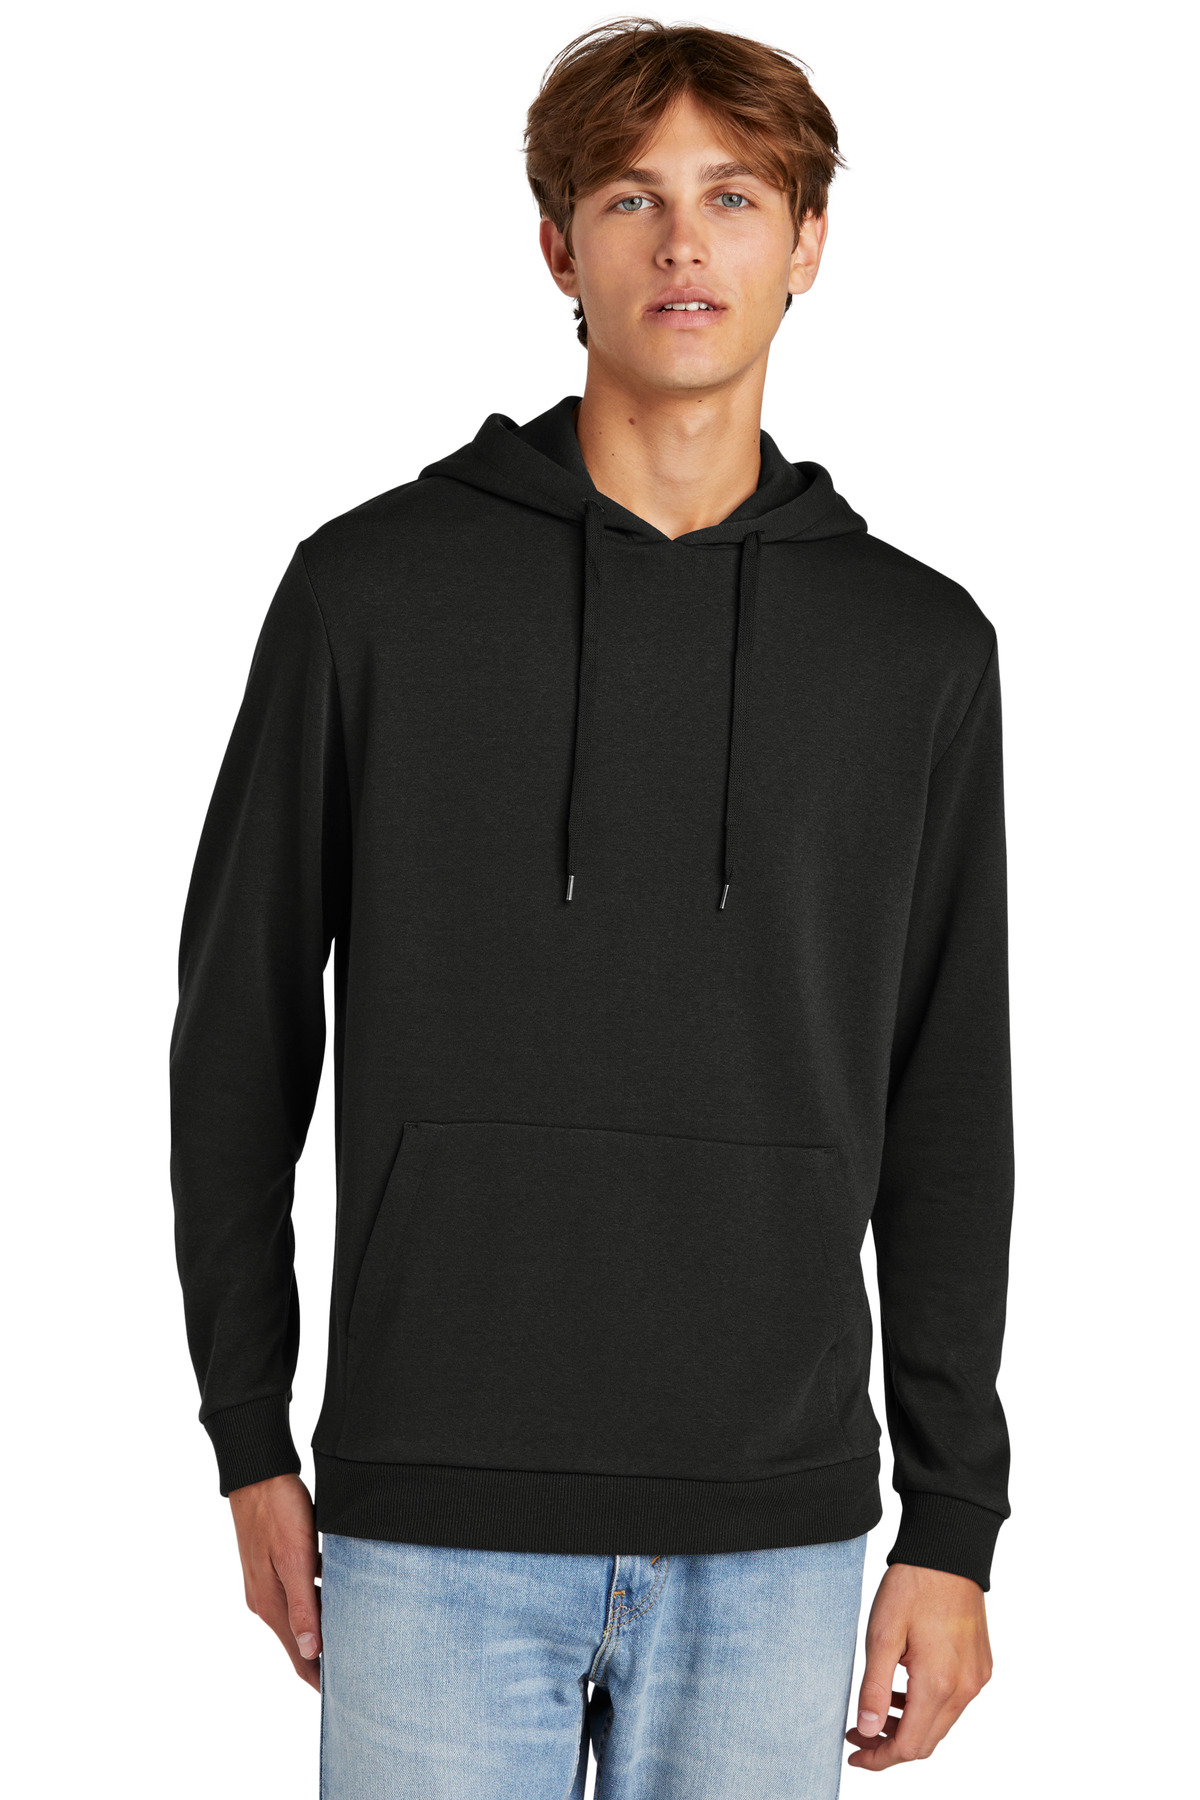 District ®  Perfect Tri ®  Fleece Pullover Hoodie DT1300